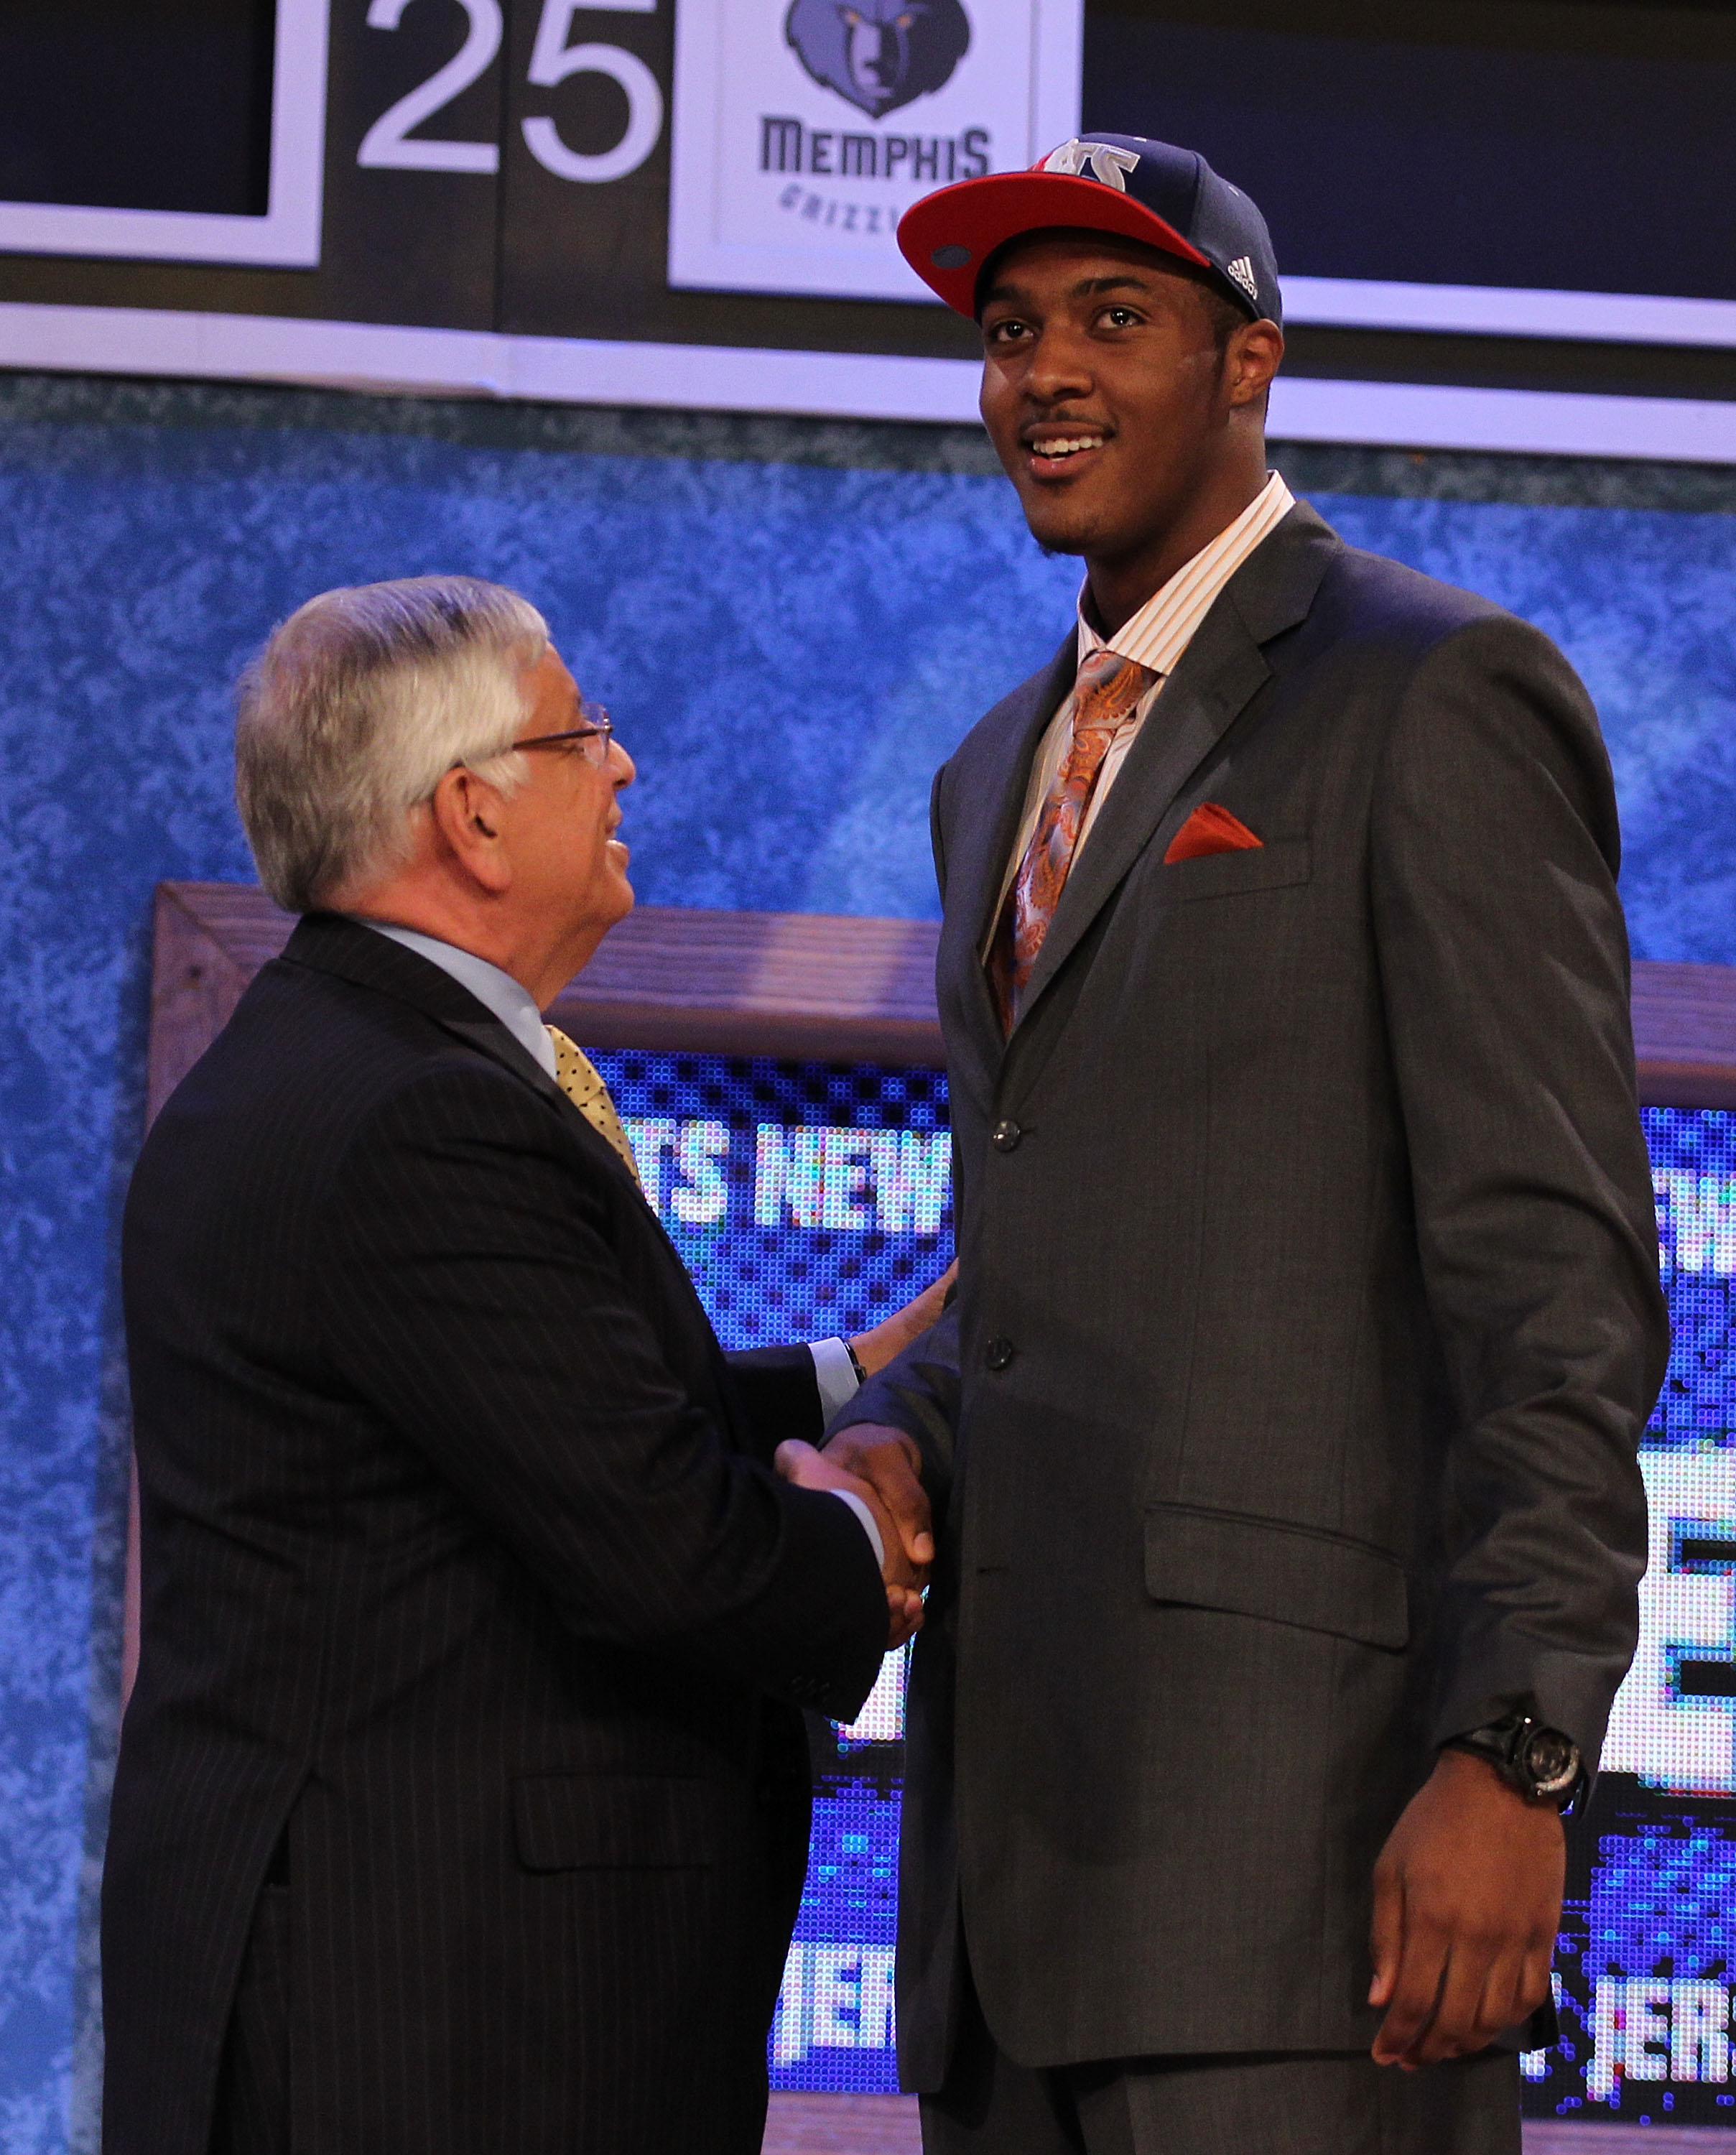 NEW YORK - JUNE 24:  Derrick Favors of Georgia State stands with NBA Commisioner David Stern after being drafted third overall by the New Jersey Nets at Madison Square Garden on June 24, 2010 in New York City.  NOTE TO USER: User expressly acknowledges an